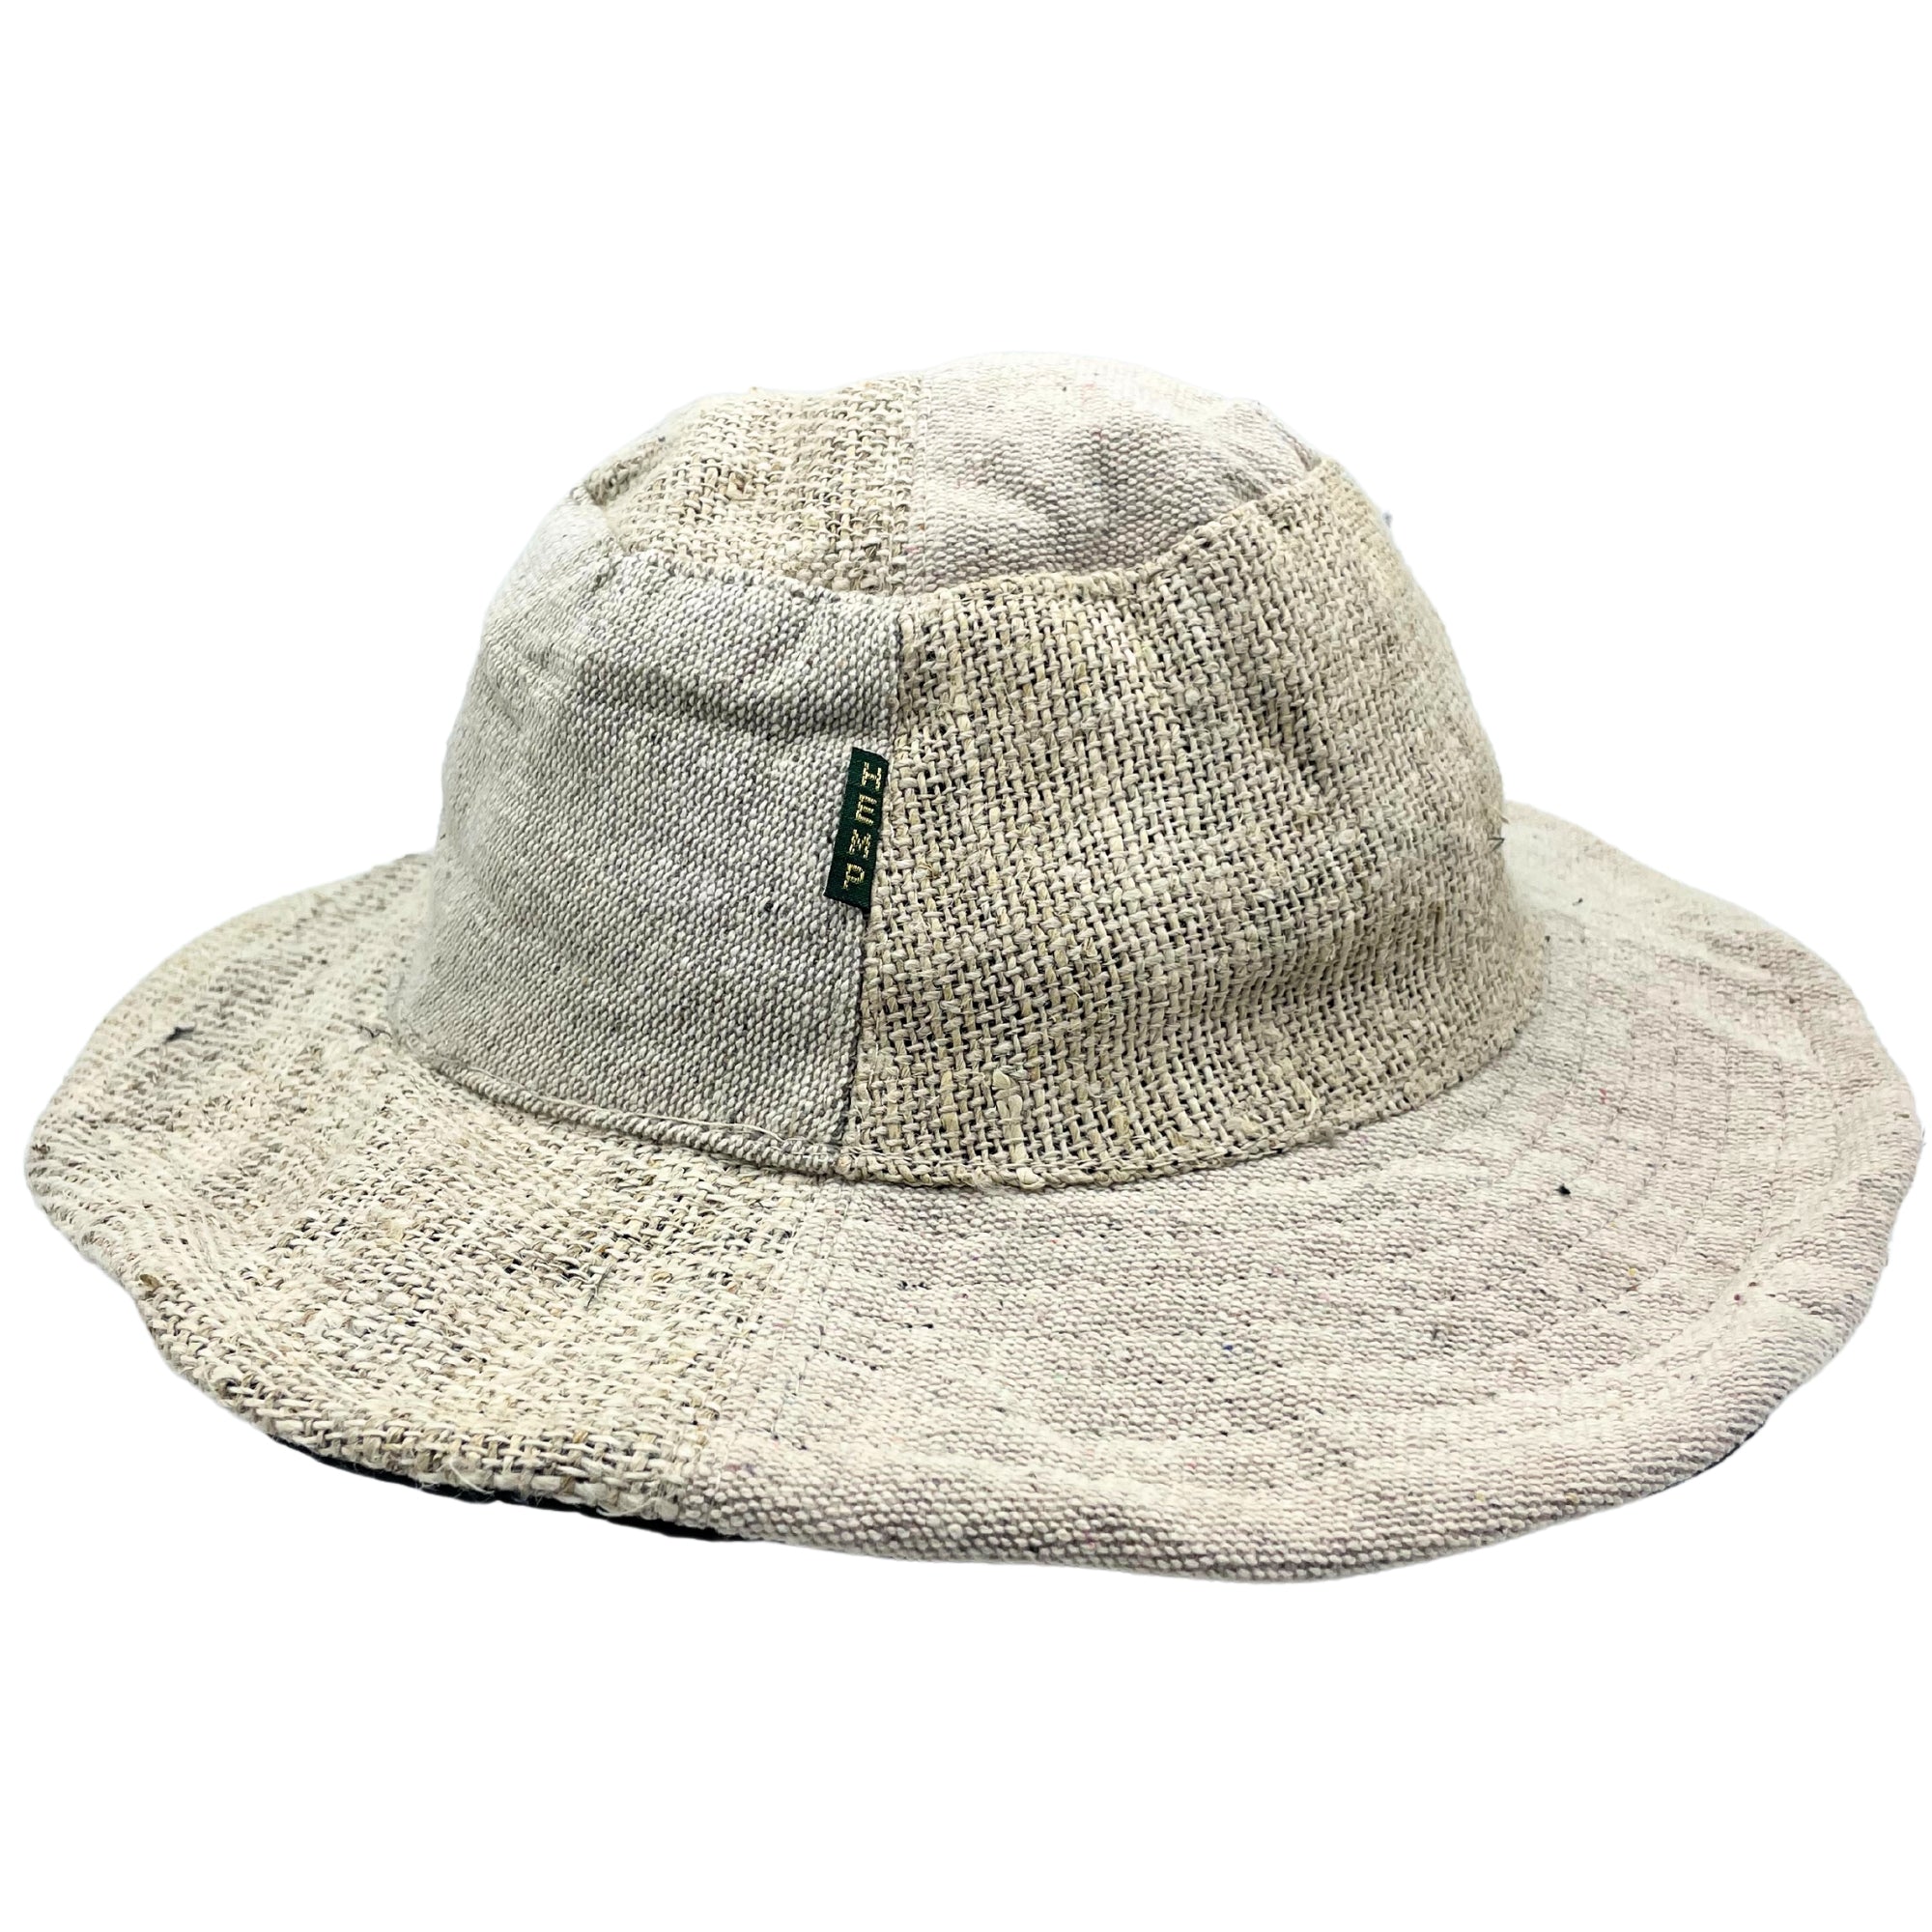 View Patched and Wired Hemp Cotton Boho Festival Hat Natural information